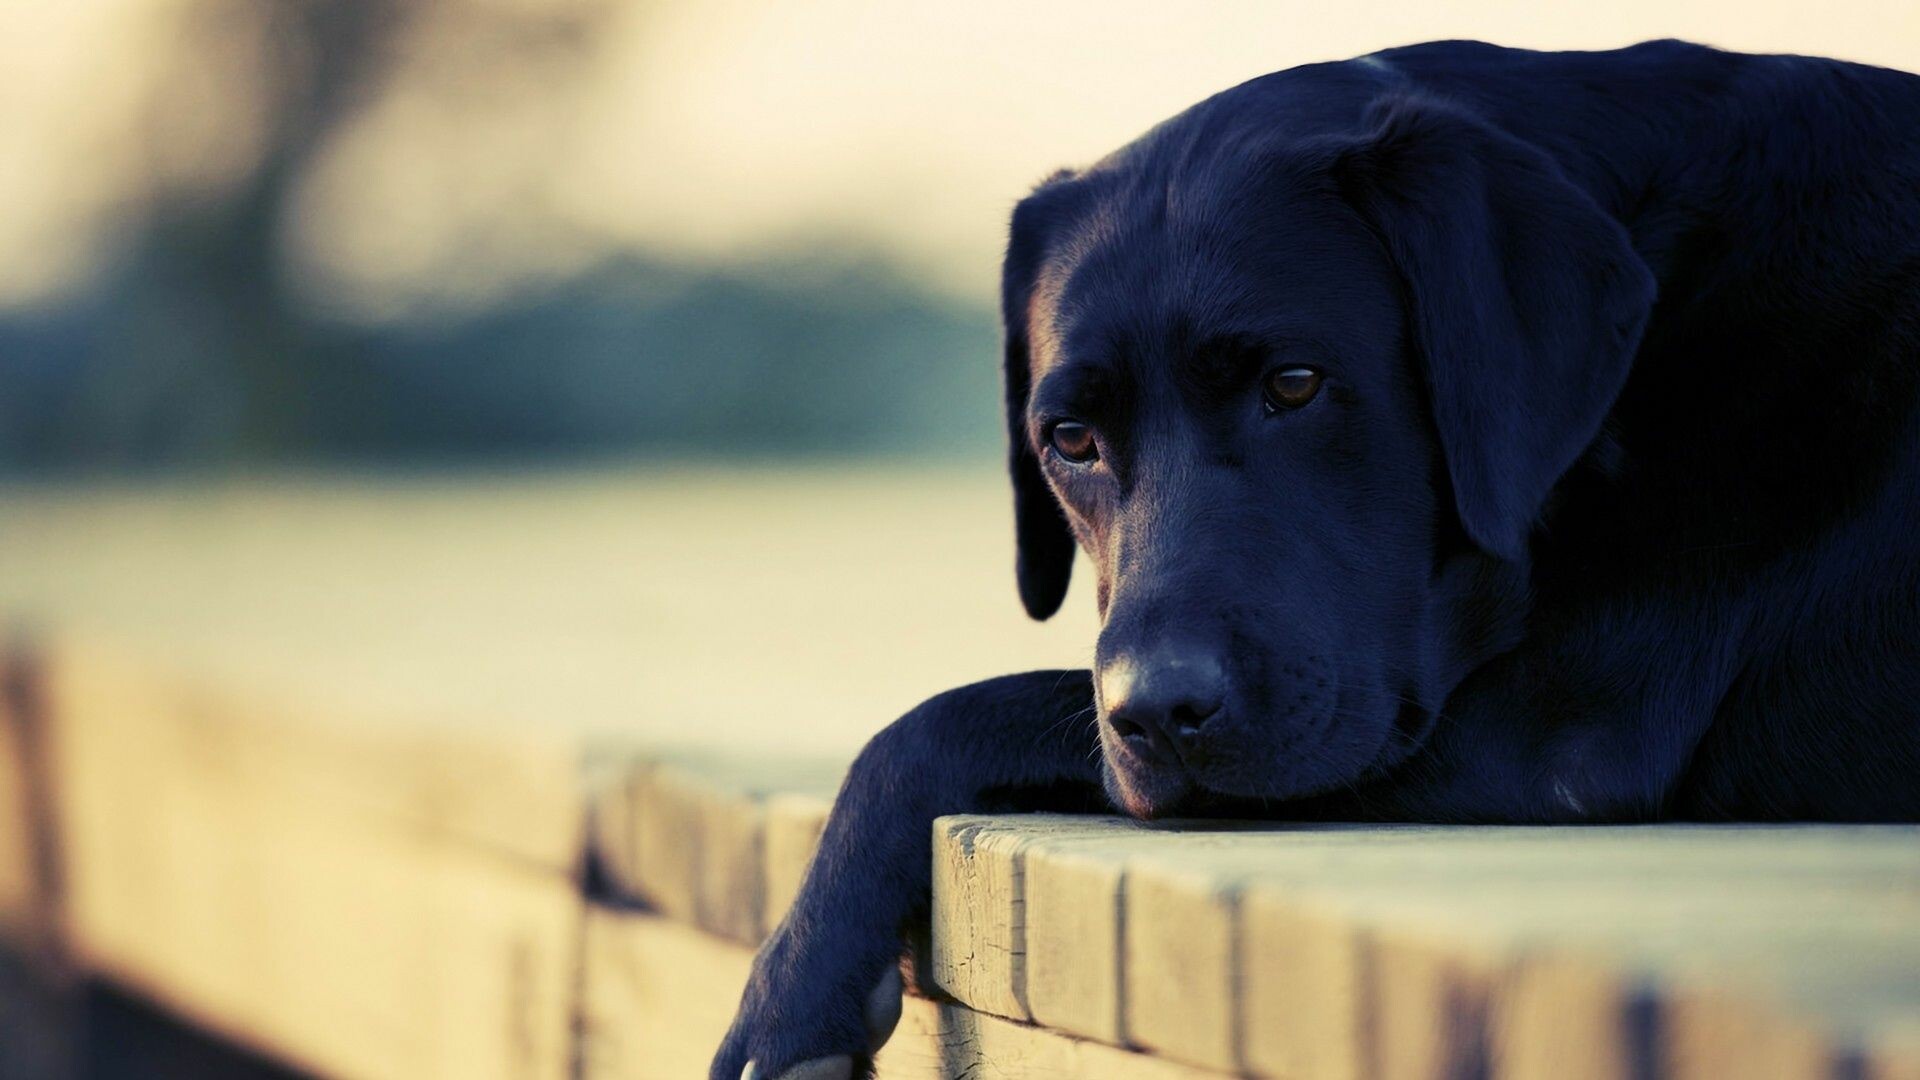 Labrador: Friendly, gentle, intelligent, and eager to please, it is an ideal hunting companion and family dog, Working animal. 1920x1080 Full HD Wallpaper.